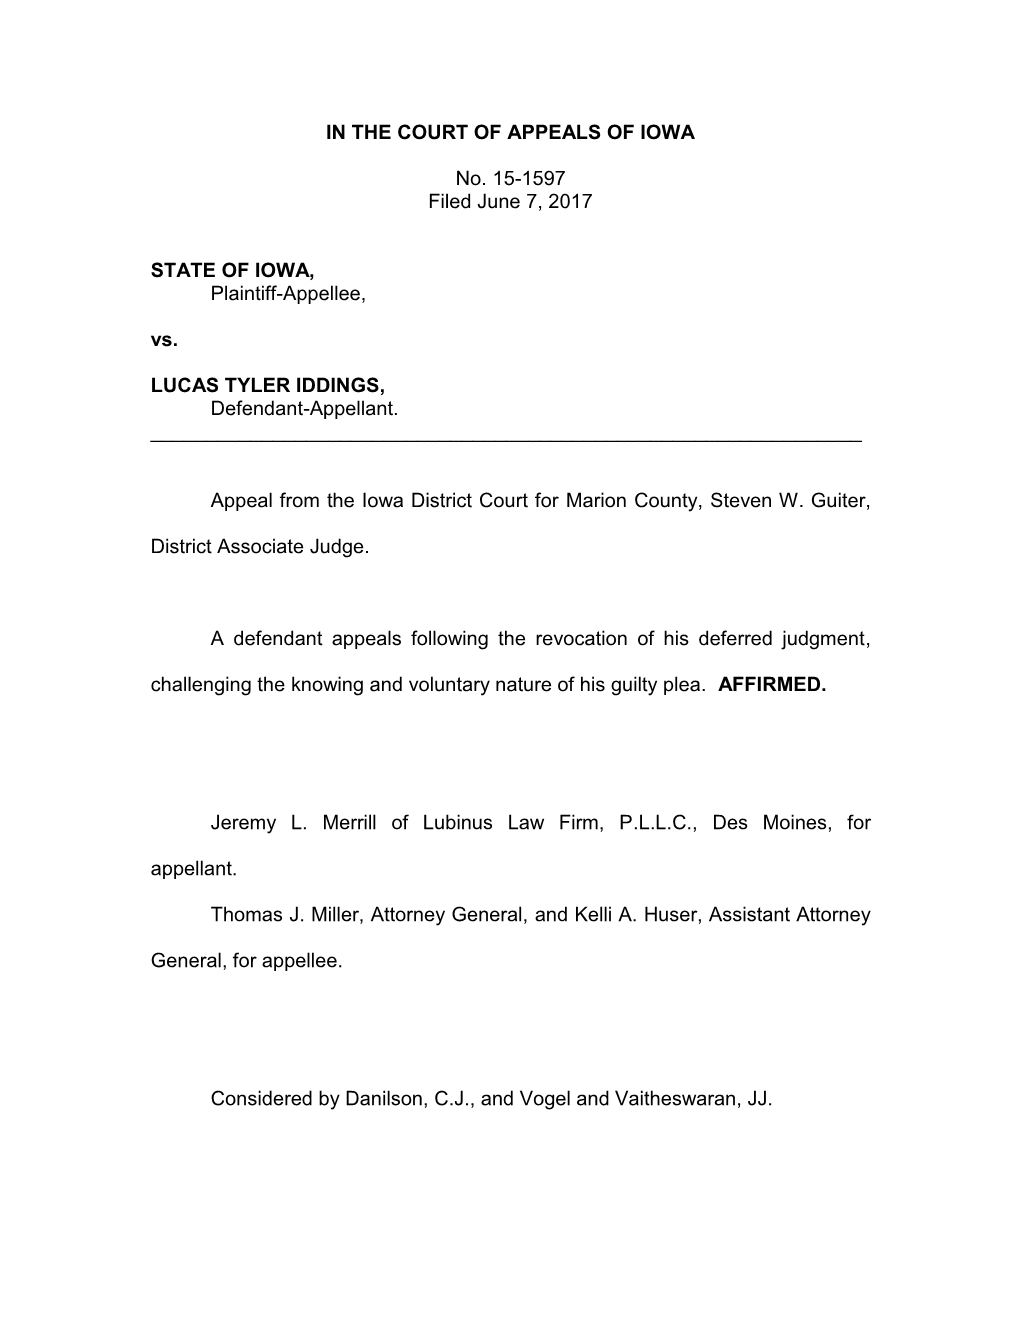 IN the COURT of APPEALS of IOWA No. 15-1597 Filed June 7